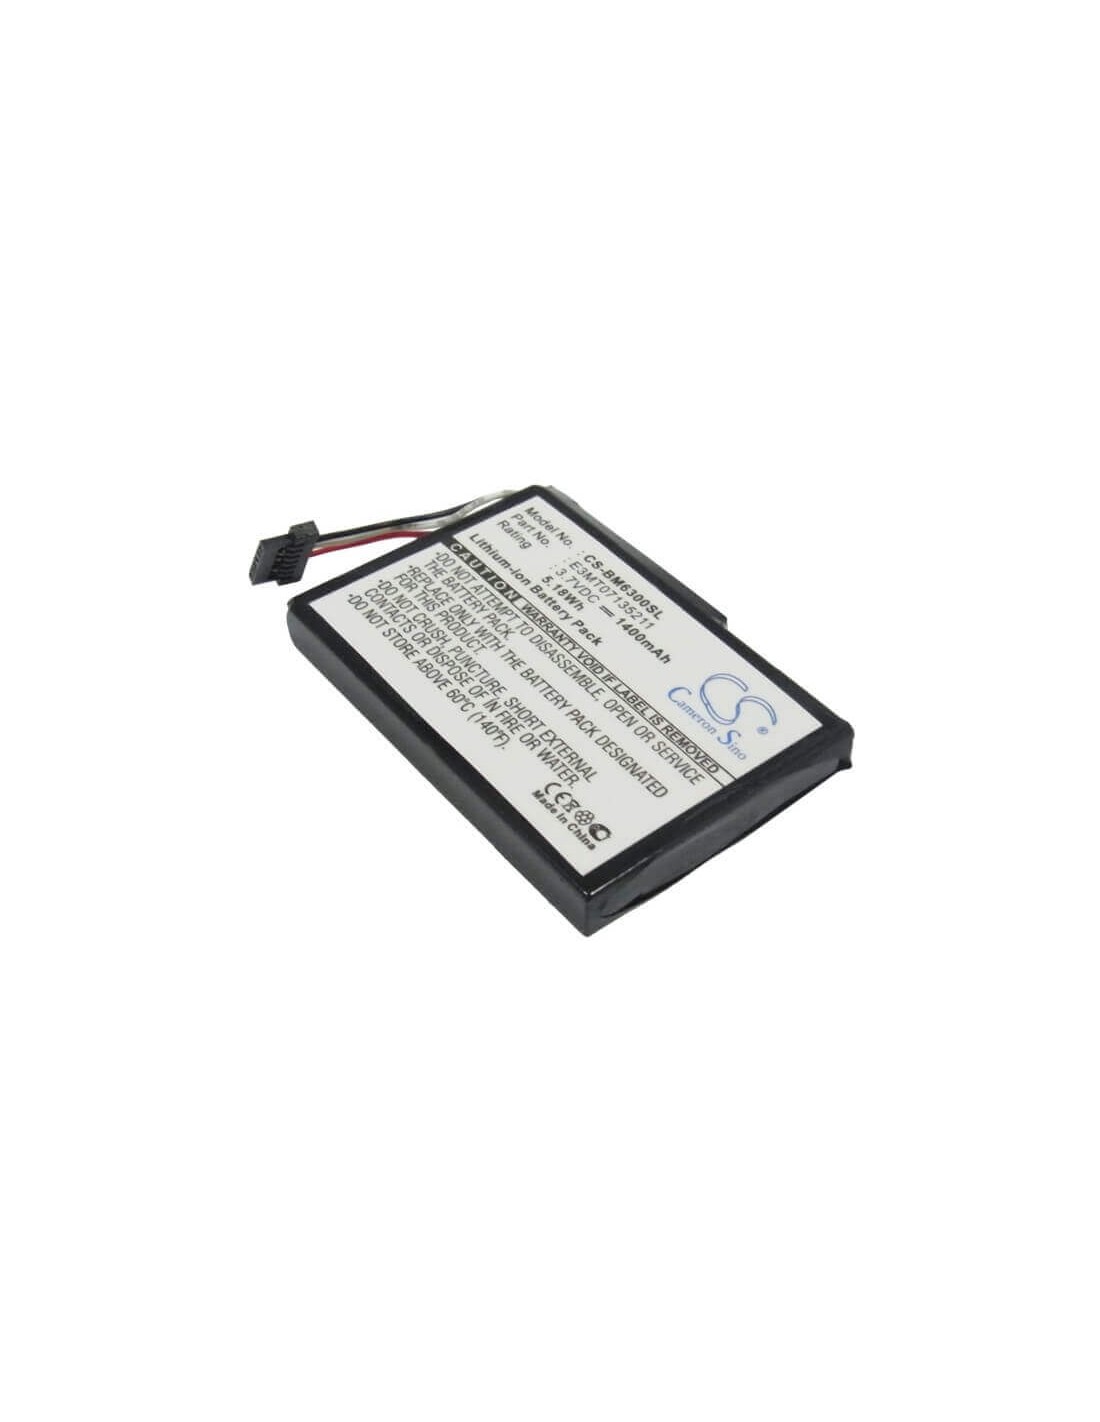 Battery for Jucon Gps-3741 3.7V, 1400mAh - 5.18Wh